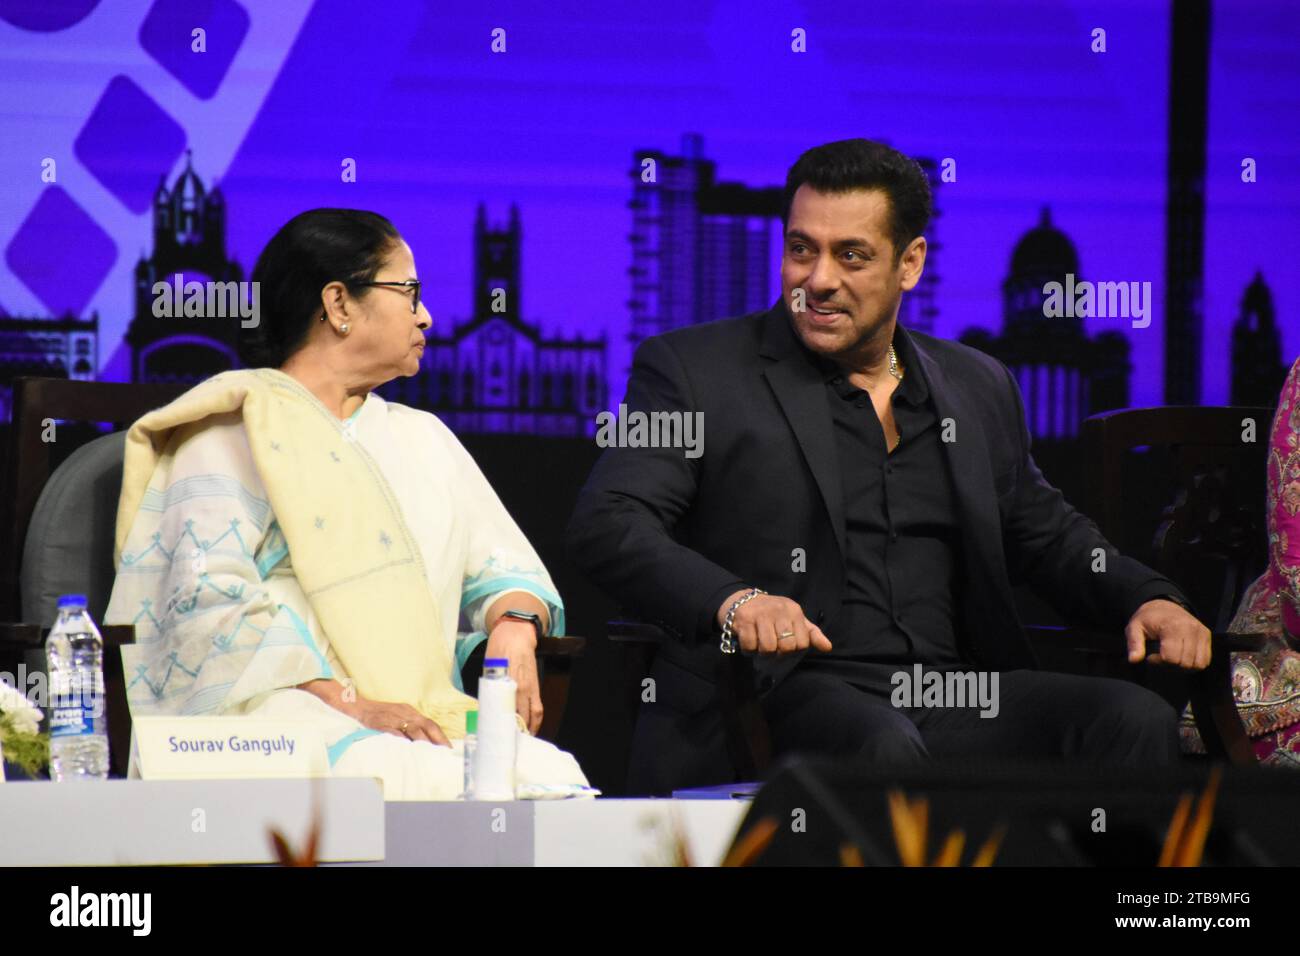 Kolkata, West Bengal, India. 5th Dec, 2023. Mamata Banerjee (L), Chief Minister of West Bengal talking with Bollywood star actor Salman Khan (R) at the inaugural function of the 29th edition of the Kolkata International Film Festival (KIFF 29), organized by the Information and Cultural Affairs Department, Government of West Bengal, which is scheduled to be held between 5 - 12 December, 2023 in Kolkata, the cultural capital of the State of West Bengal. this festival is accredited by the International Federation of Film Producers' Association or FIAPF. (Credit Image: © Biswarup Ganguly/Pacifi Stock Photo